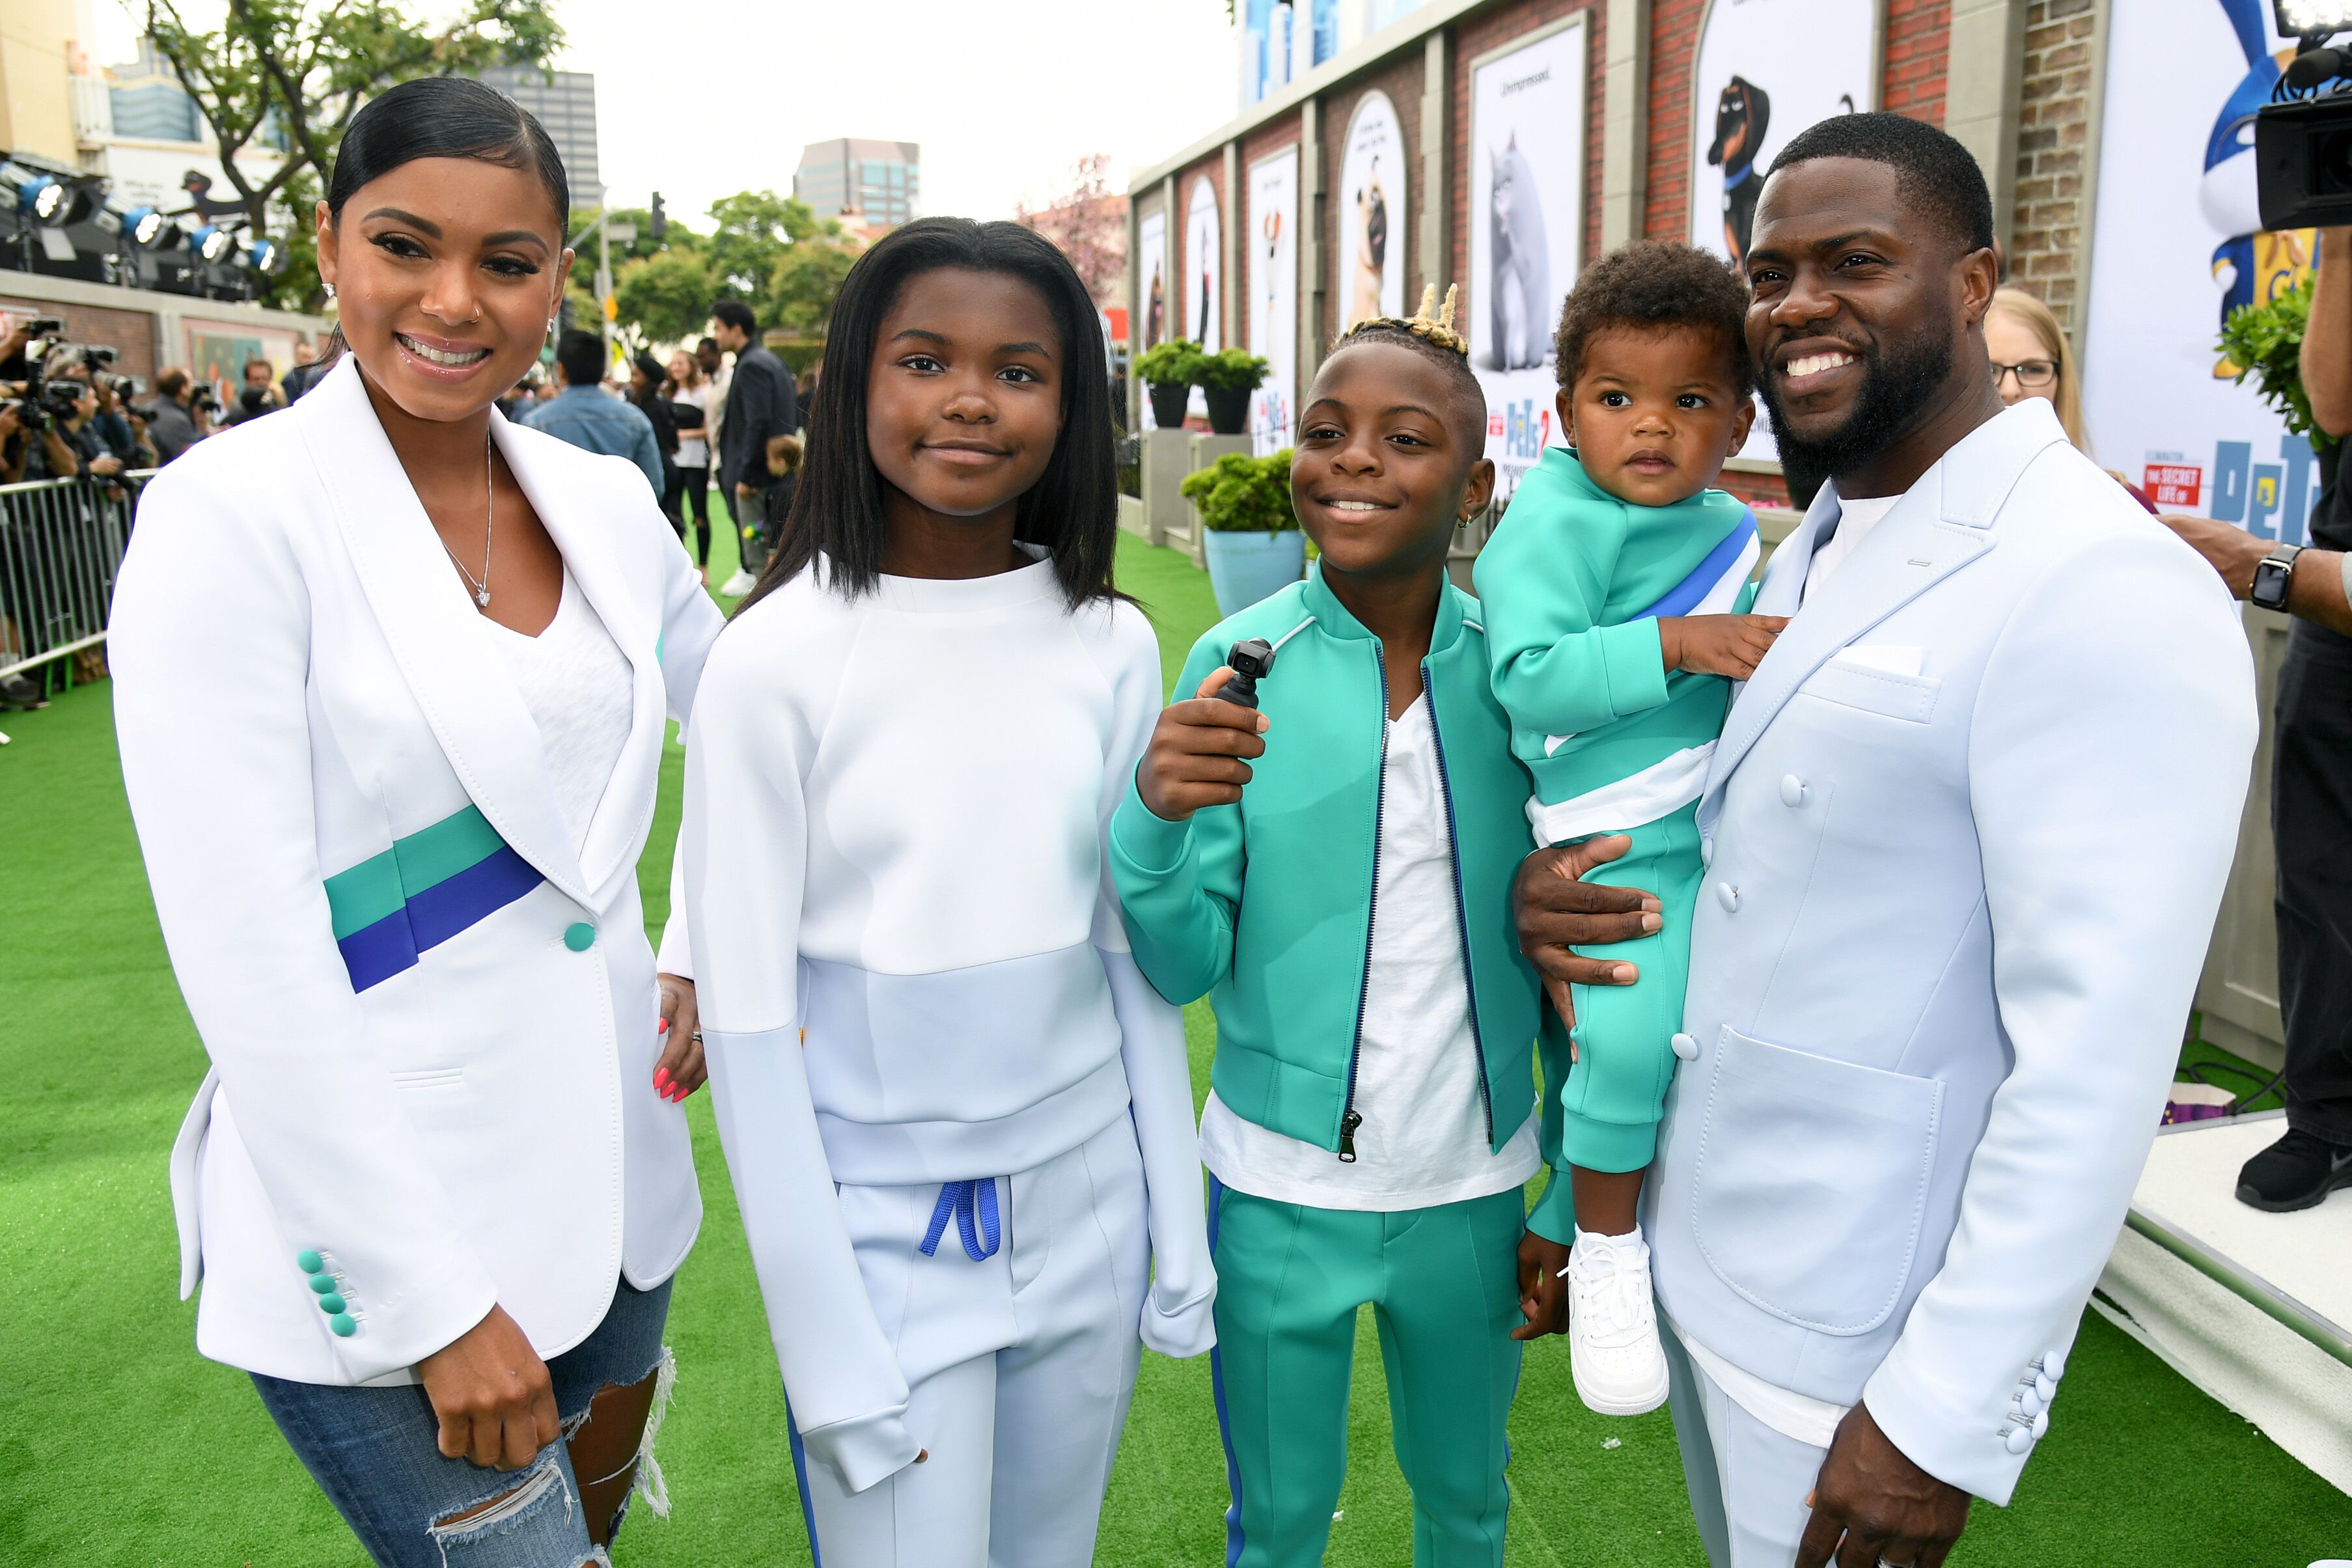 Kevin Hart, Eniko Parrish and his children at the Premiere of Universal Pictures' 'The Secret Life Of Pets 2' in June 2019 | Source: Getty Images